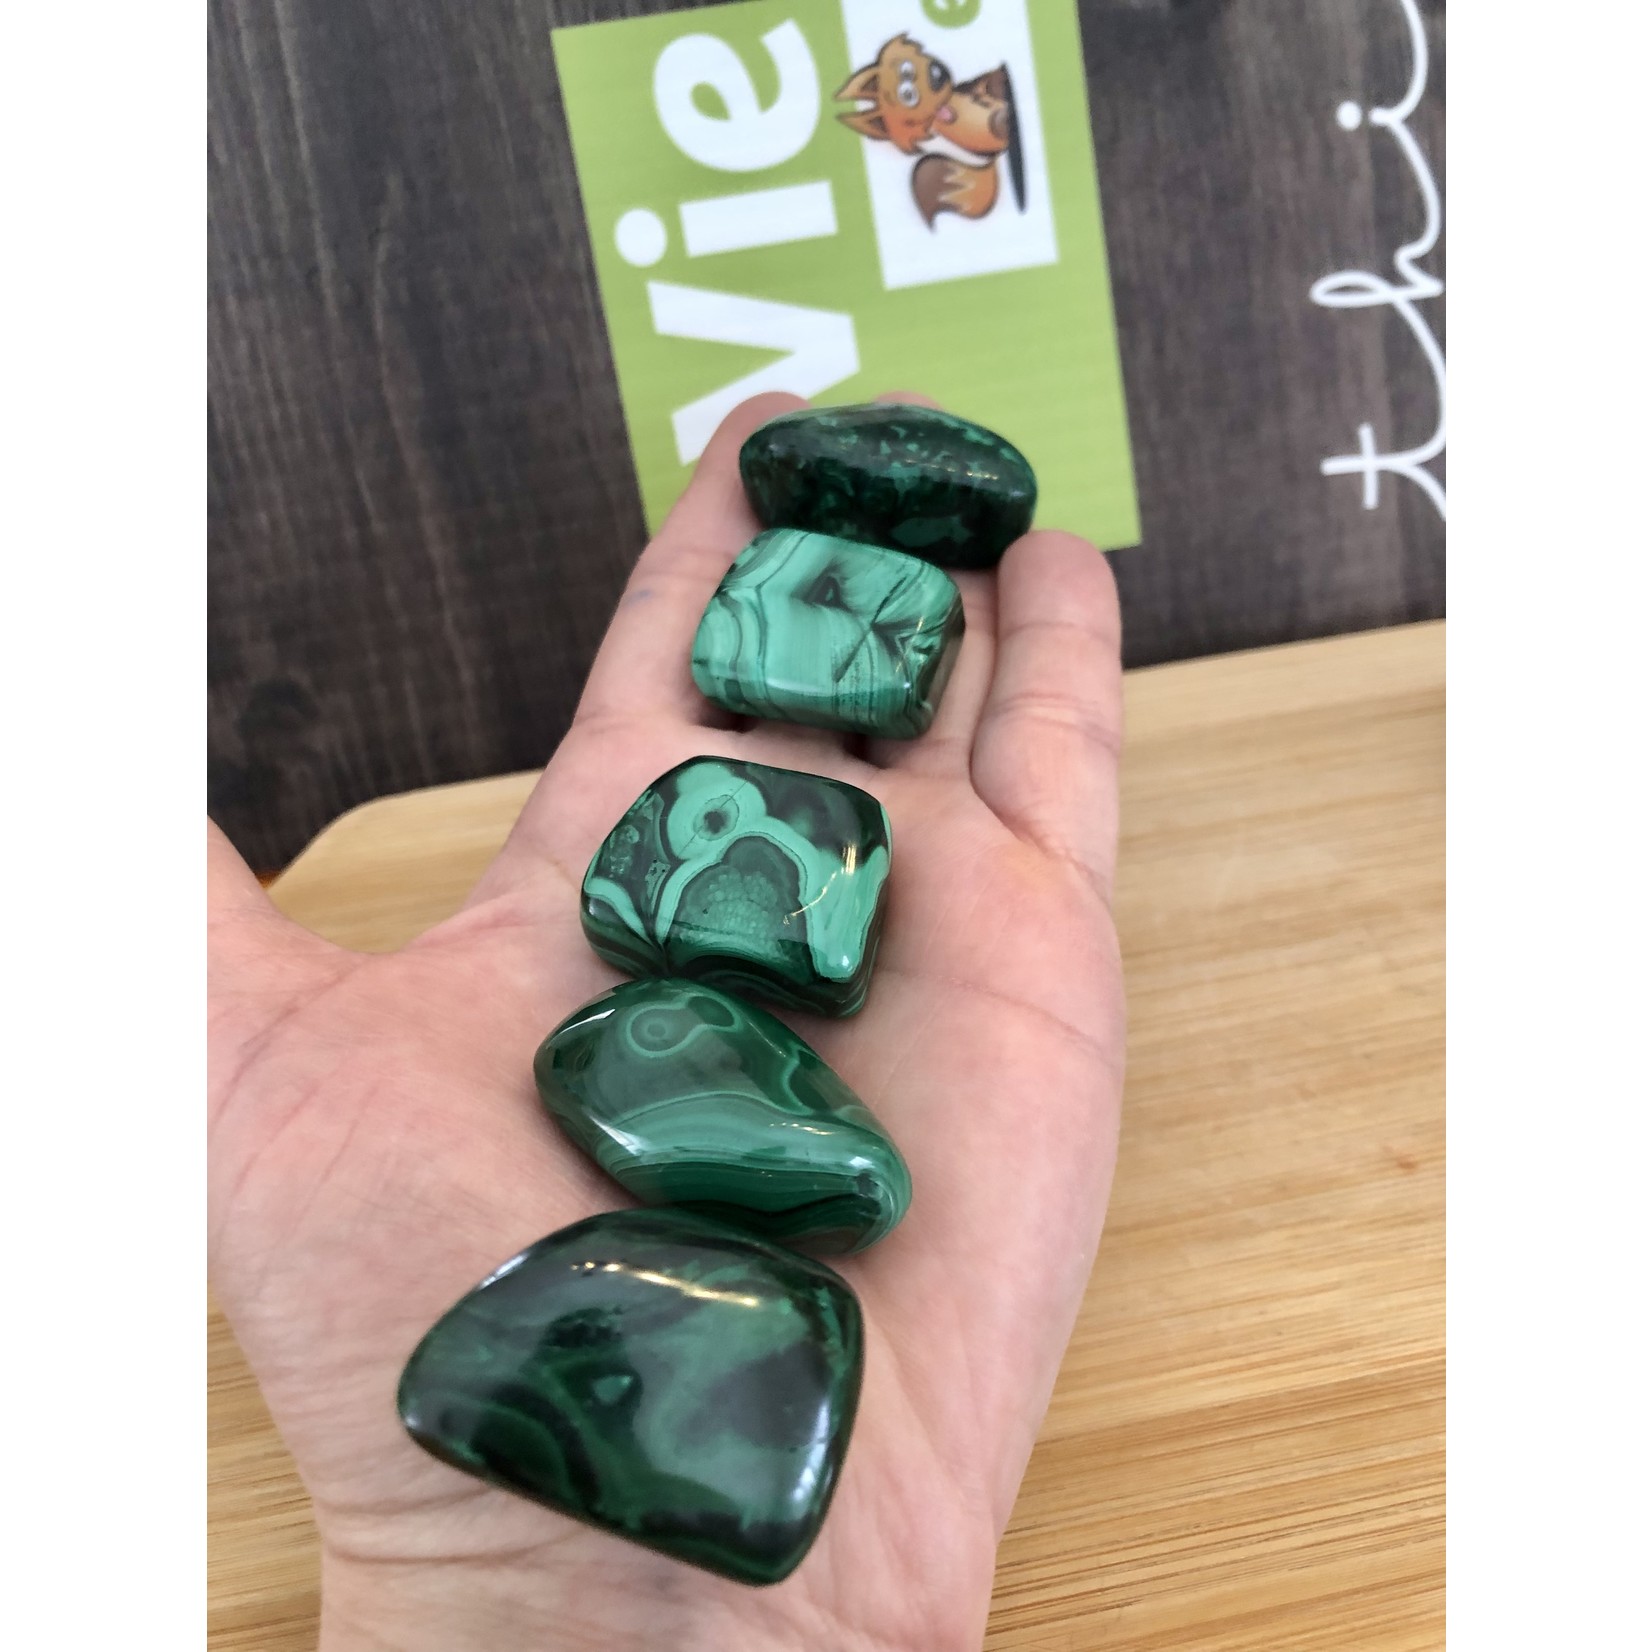 Exquisite Premium Malachite Tumbled Stone - A Luxurious Green Mineral for Pain Relief and Wellness